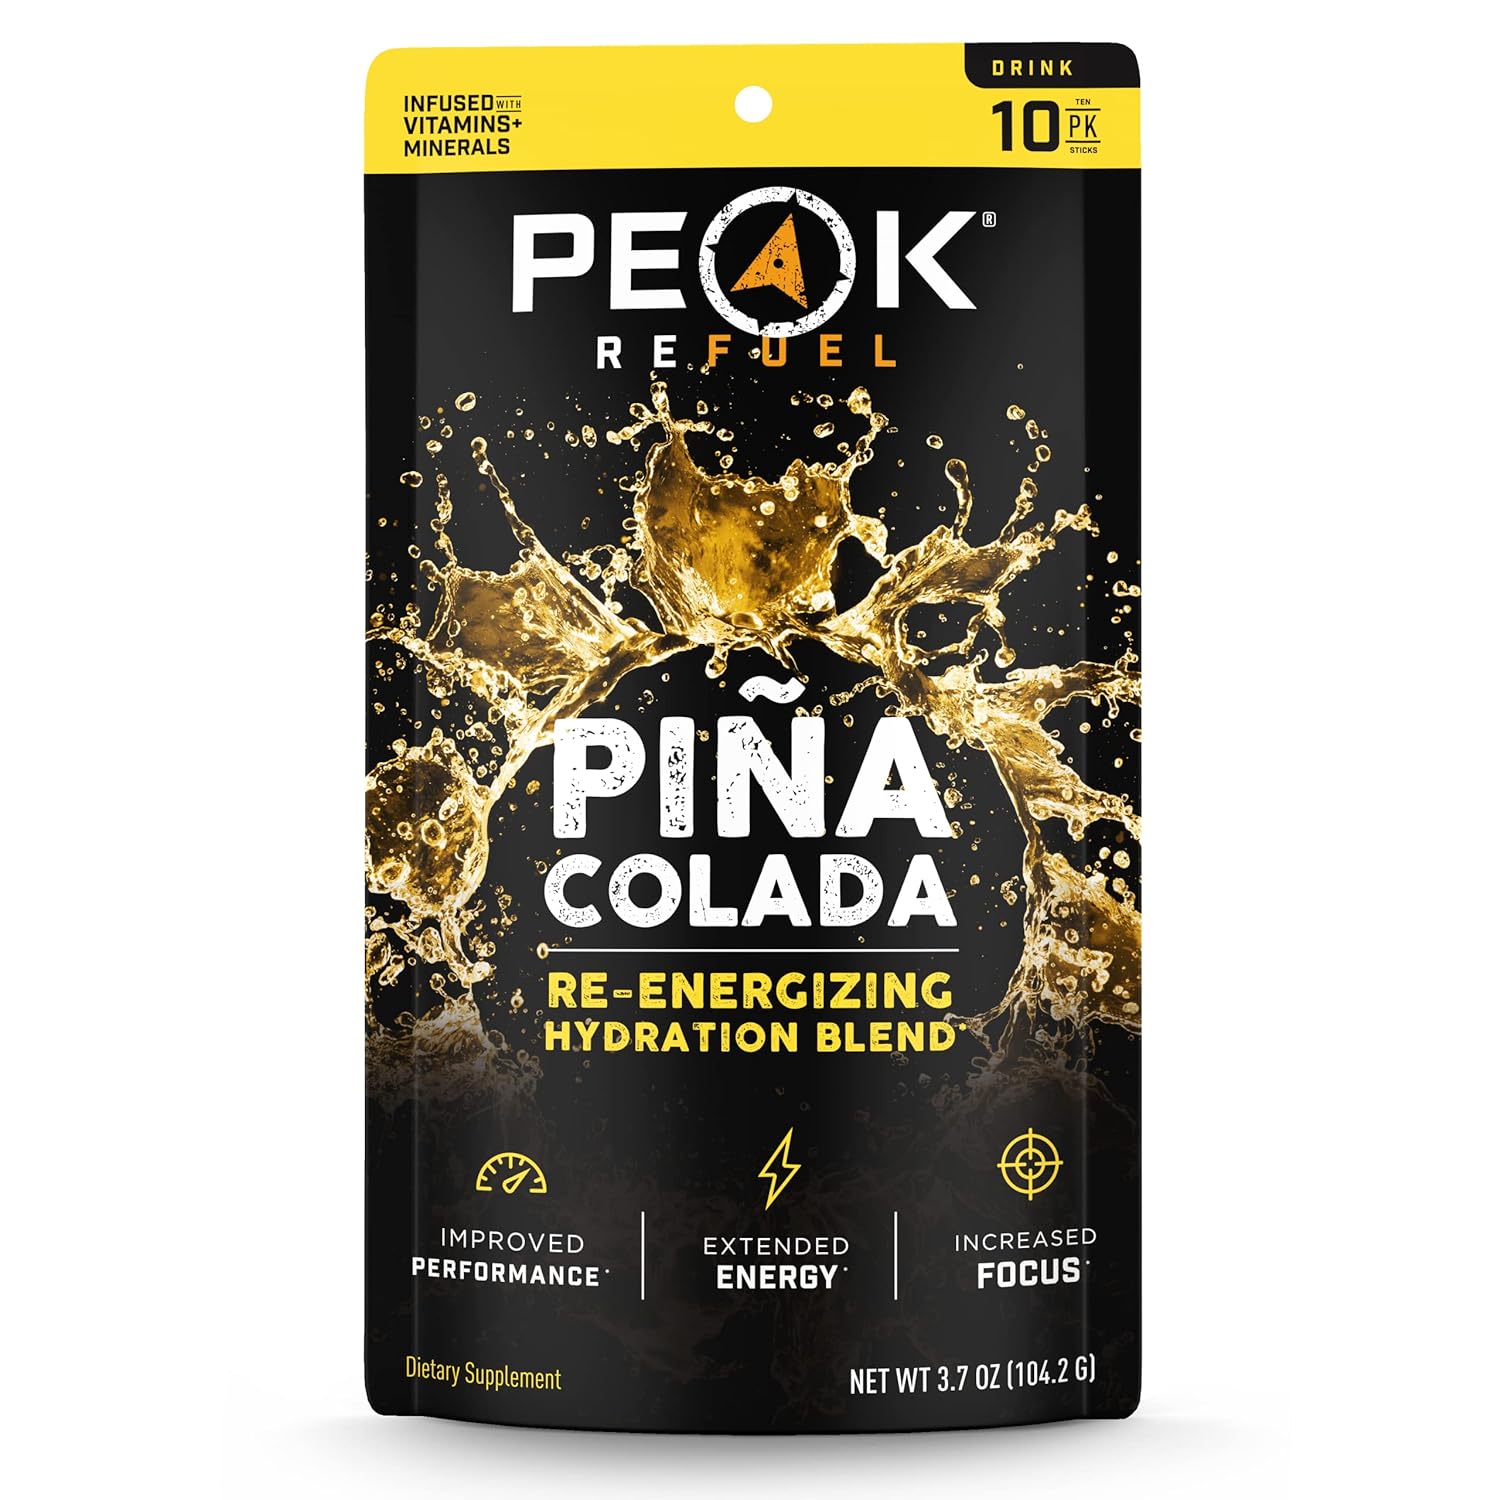 Peak Refuel Re-Energizing Drink Mix | Hydration Blend | Extended Energ